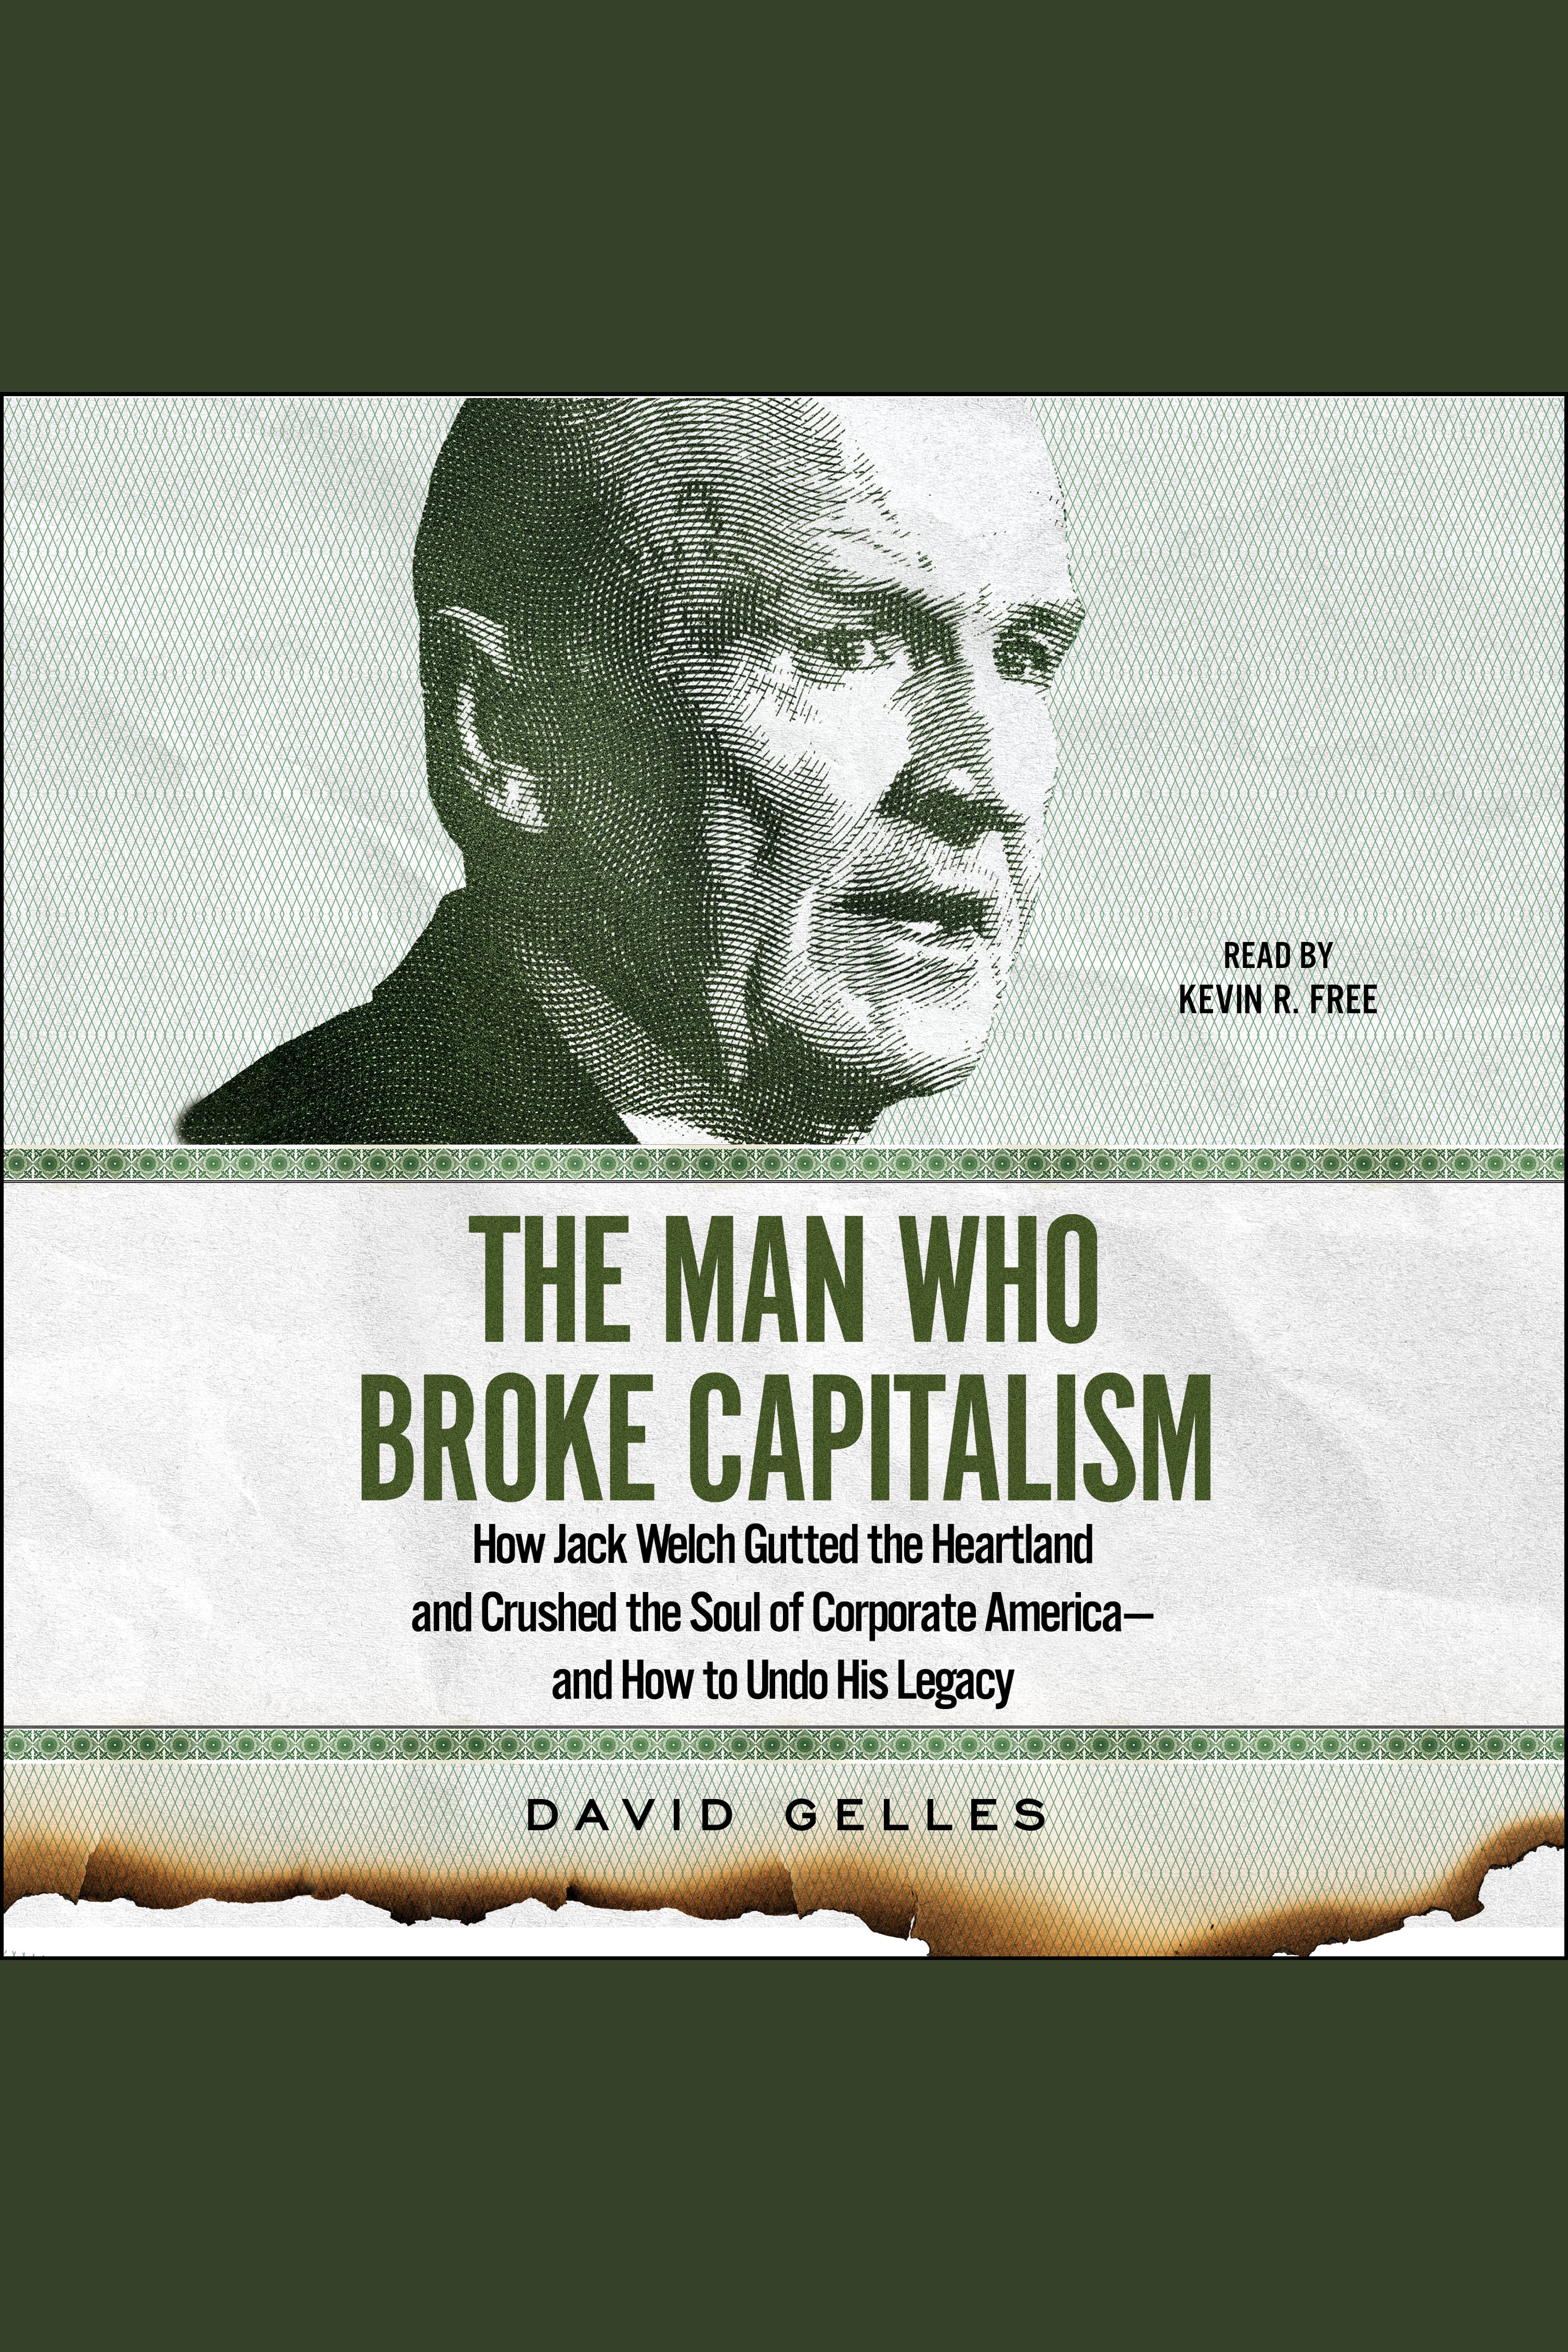 The Man Who Broke Capitalism How Jack Welch Gutted the Heartland and Crushed the Soul of Corporate America—and How to Undo His Legacy cover image